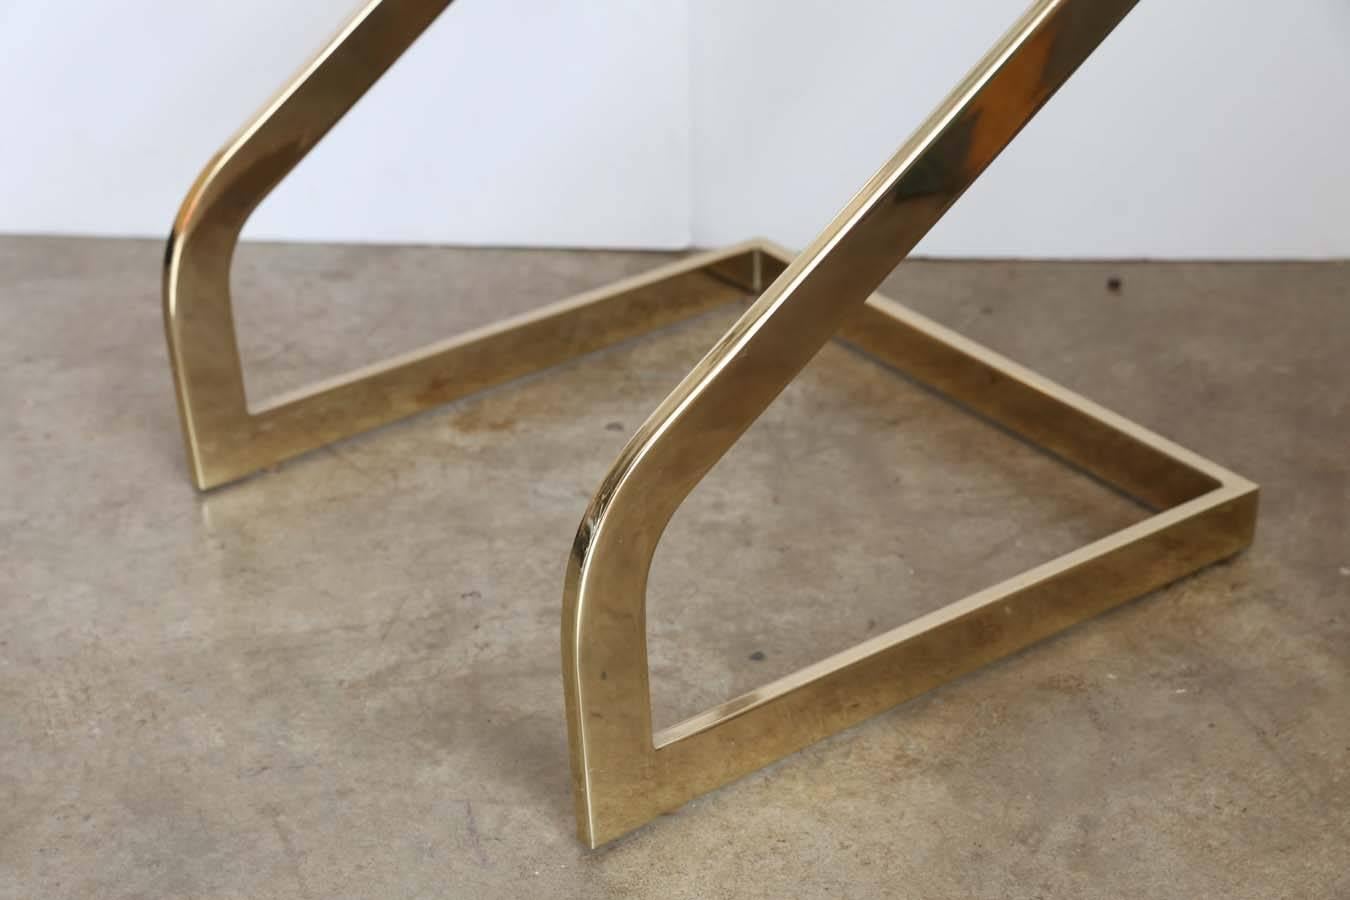 Offered is a shiny lacquered brass and glass square petite side table with a unique and sexy curved base by Design Institute America .  Light weight yet sturdy and balanced.